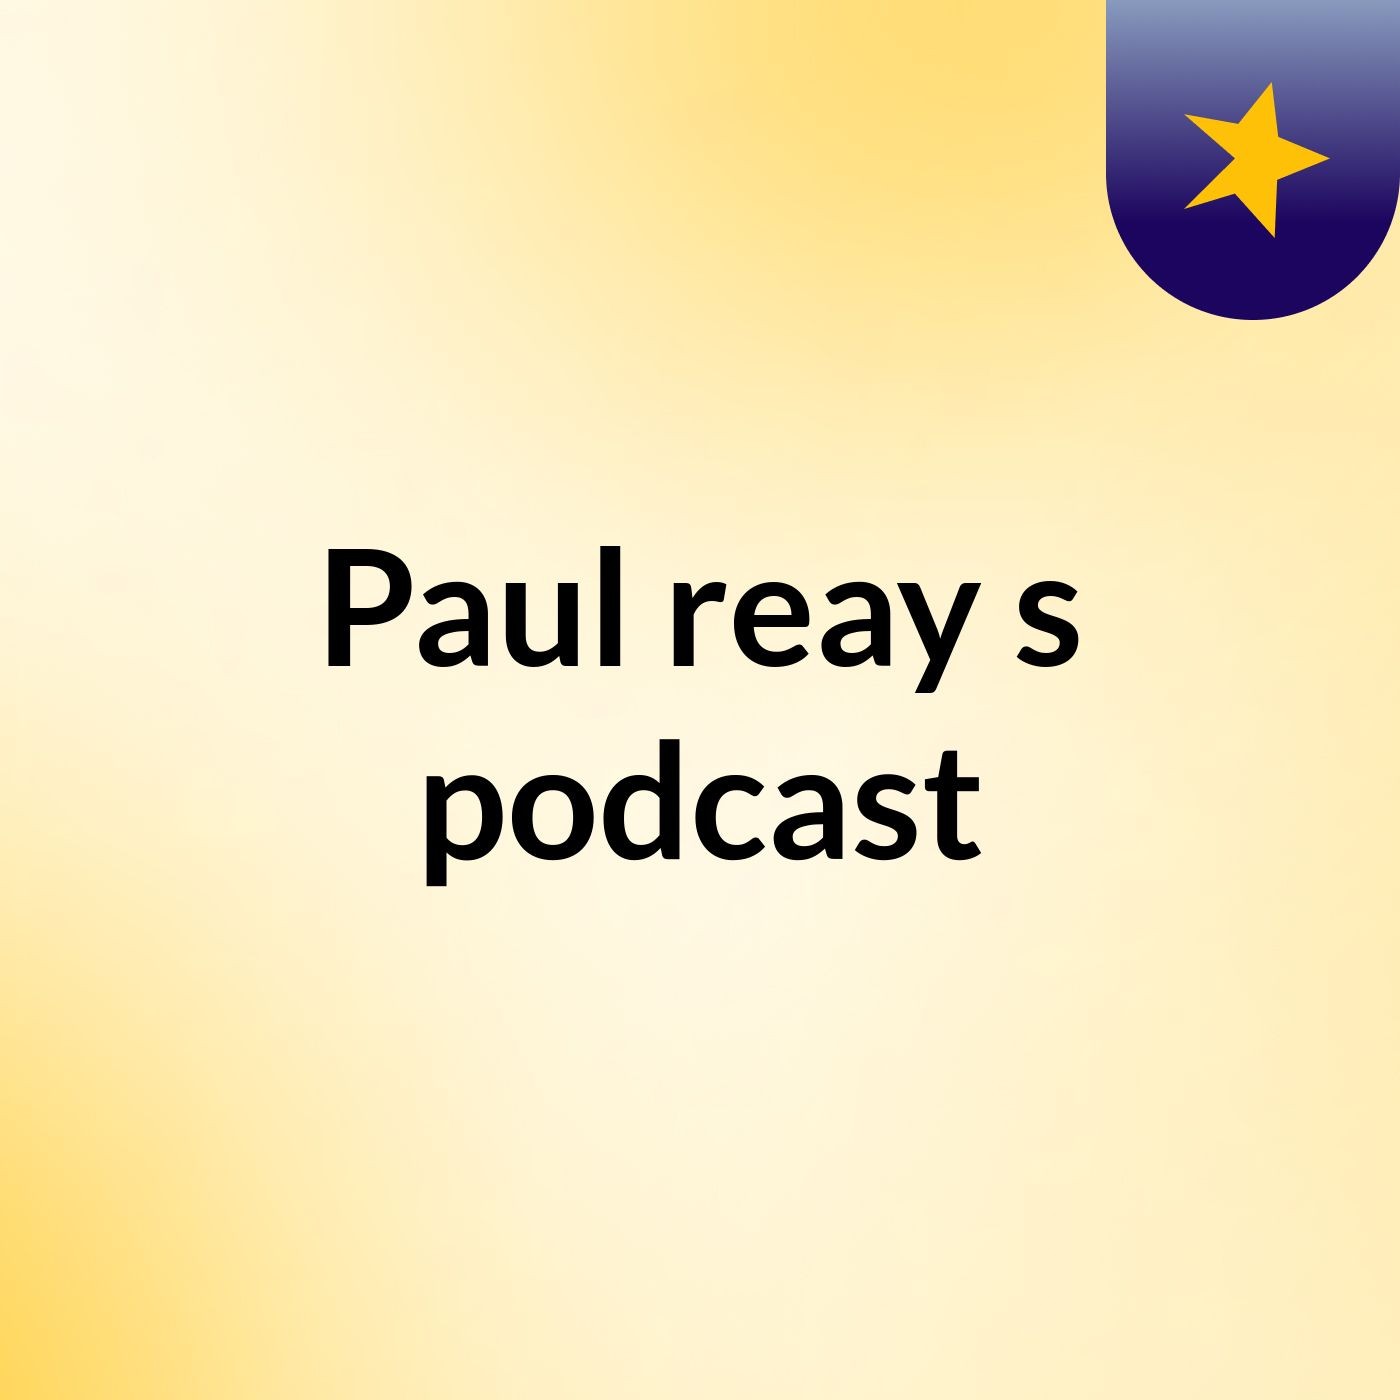 Paul reay's podcast